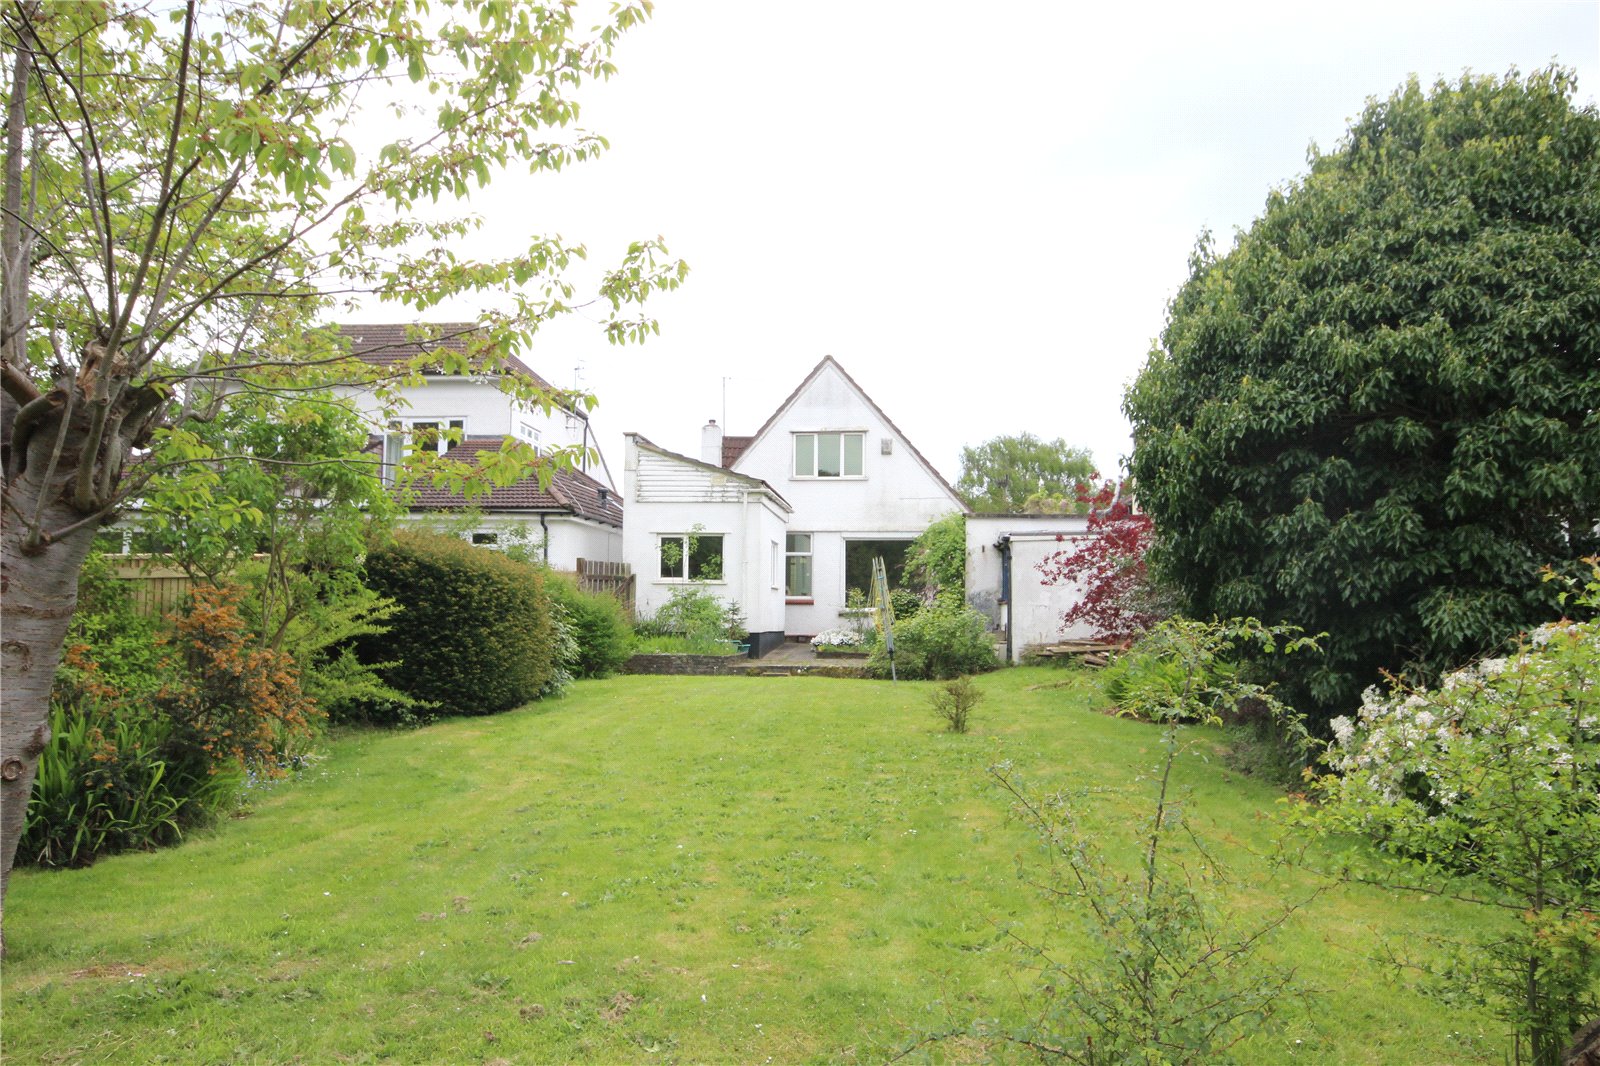 CJ Hole Westbury On Trym 3 bedroom Bungalow for sale in Canford Lane ...